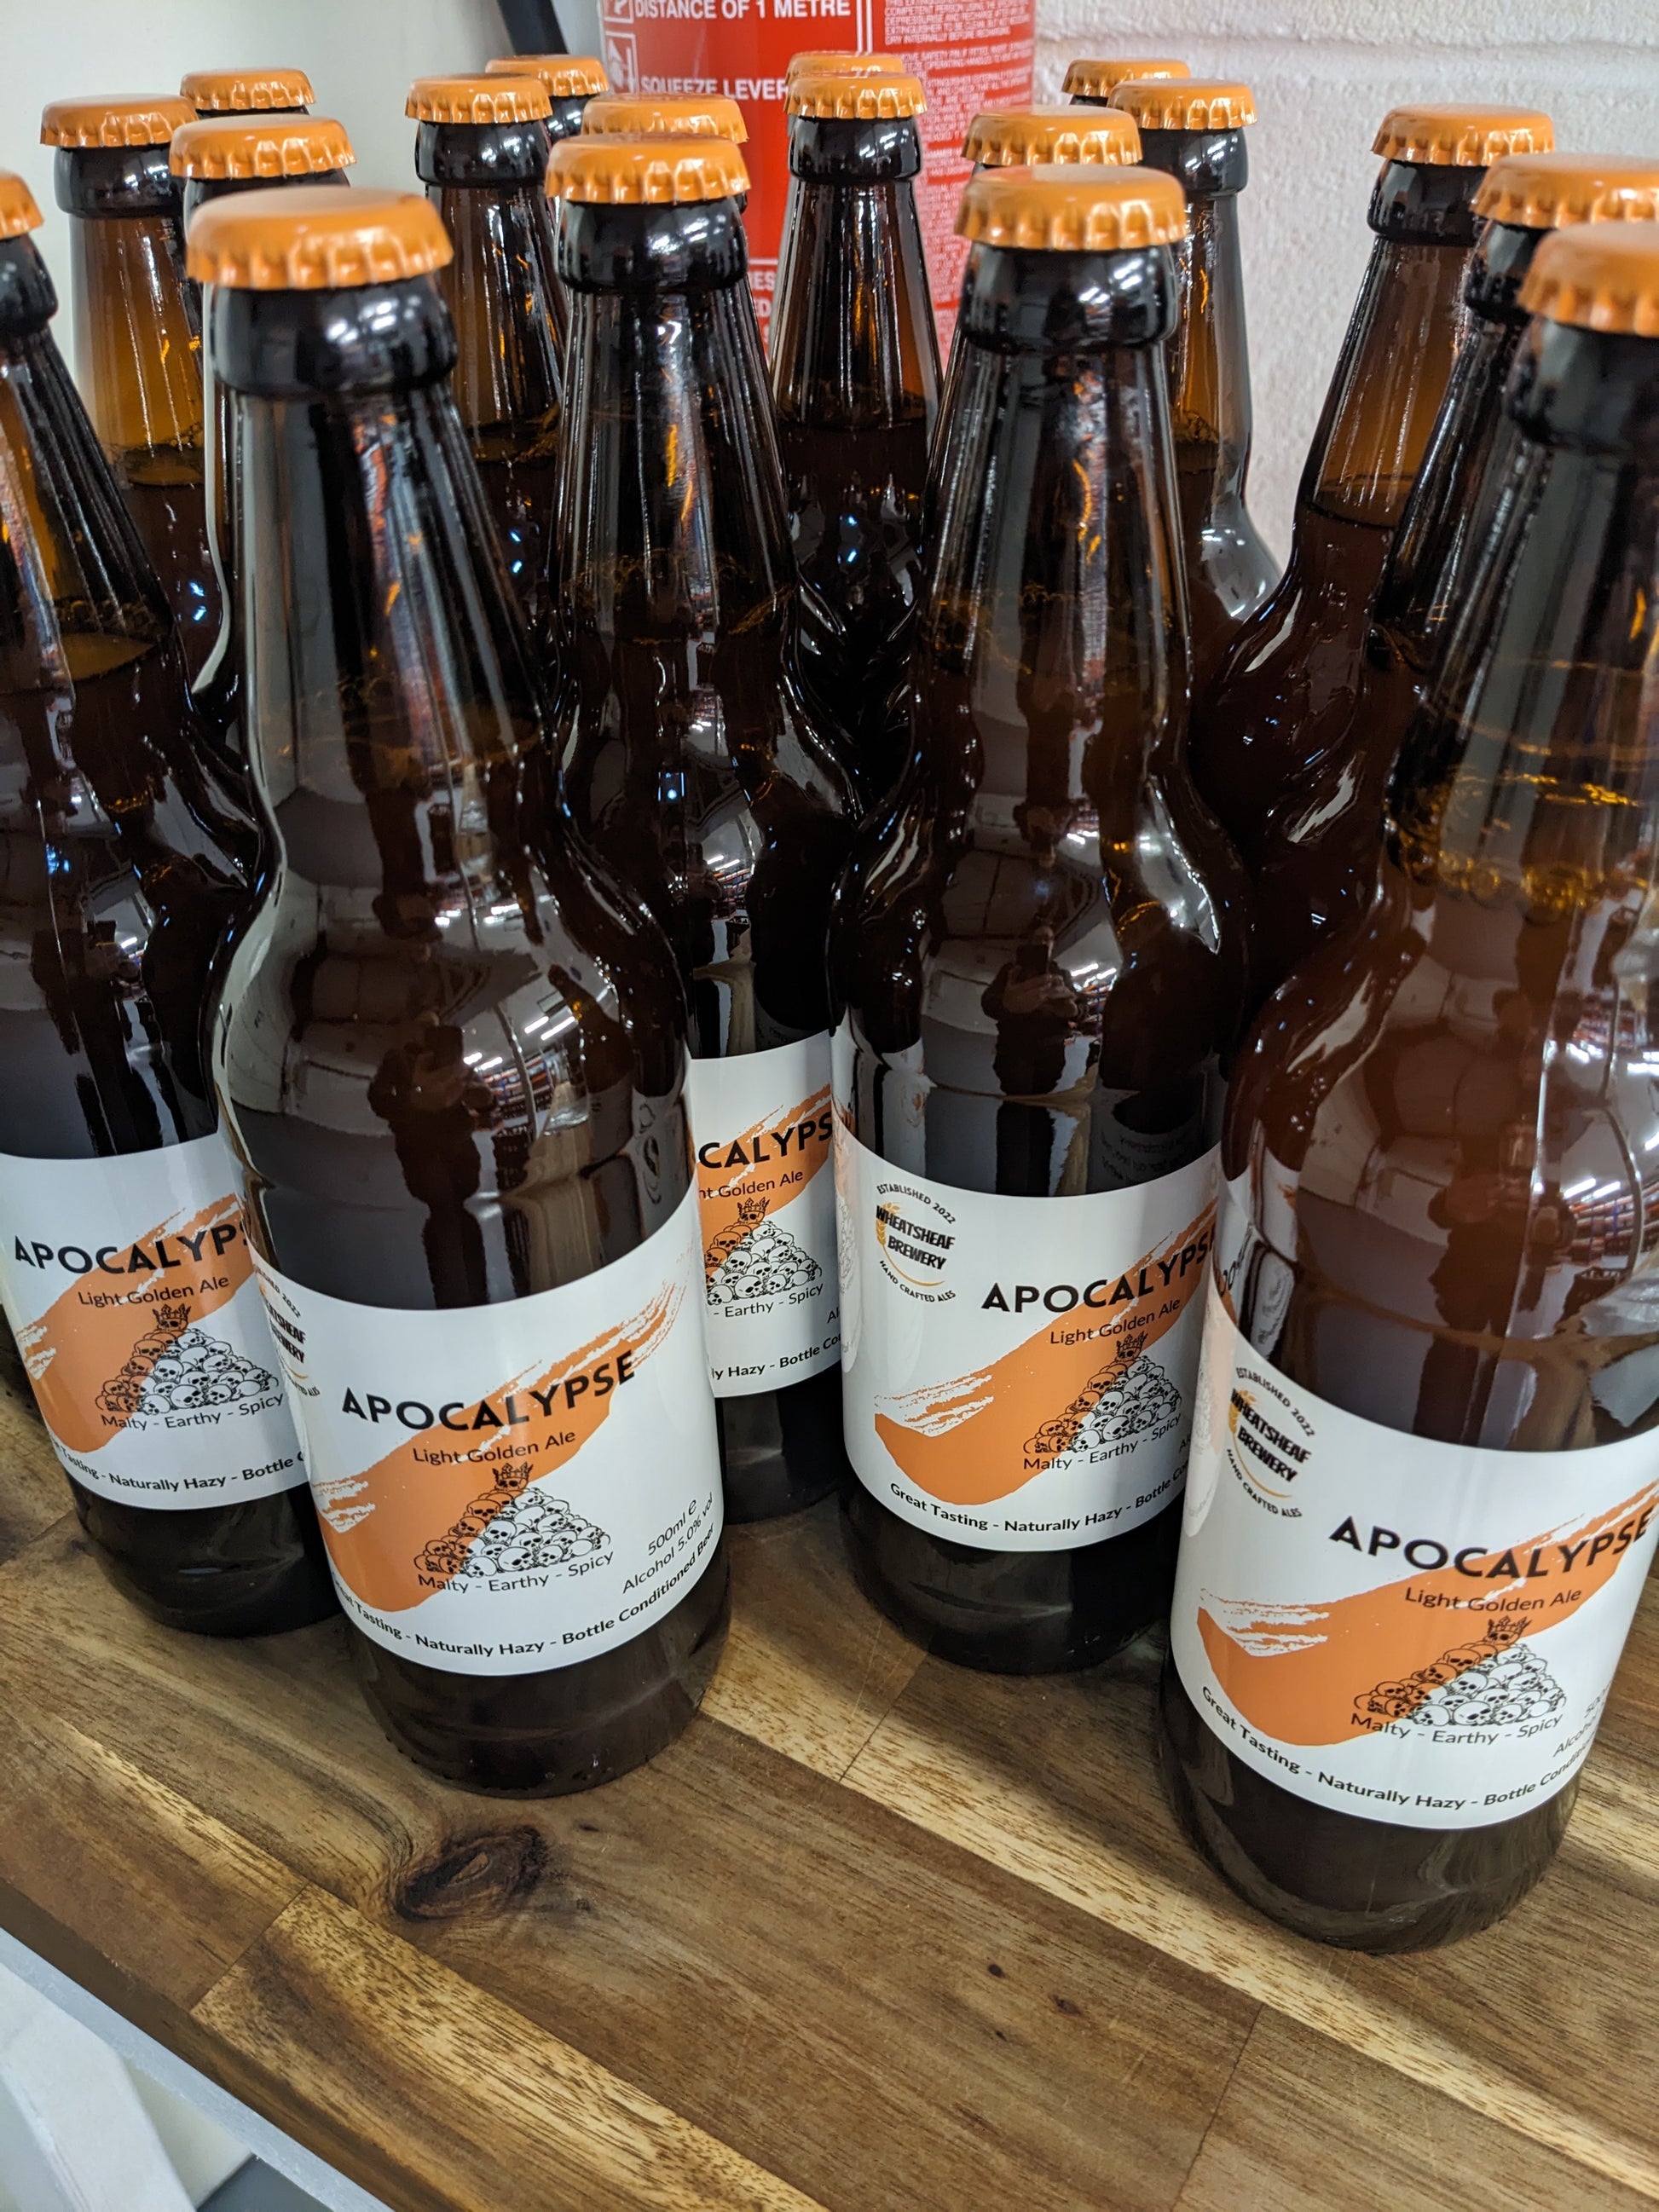 Apocalypse malty, earthy, spicy golden ale in bottles with orange caps. Great Tasting naturally hazy bottle conditioned beer brewed in Huntingdon UK